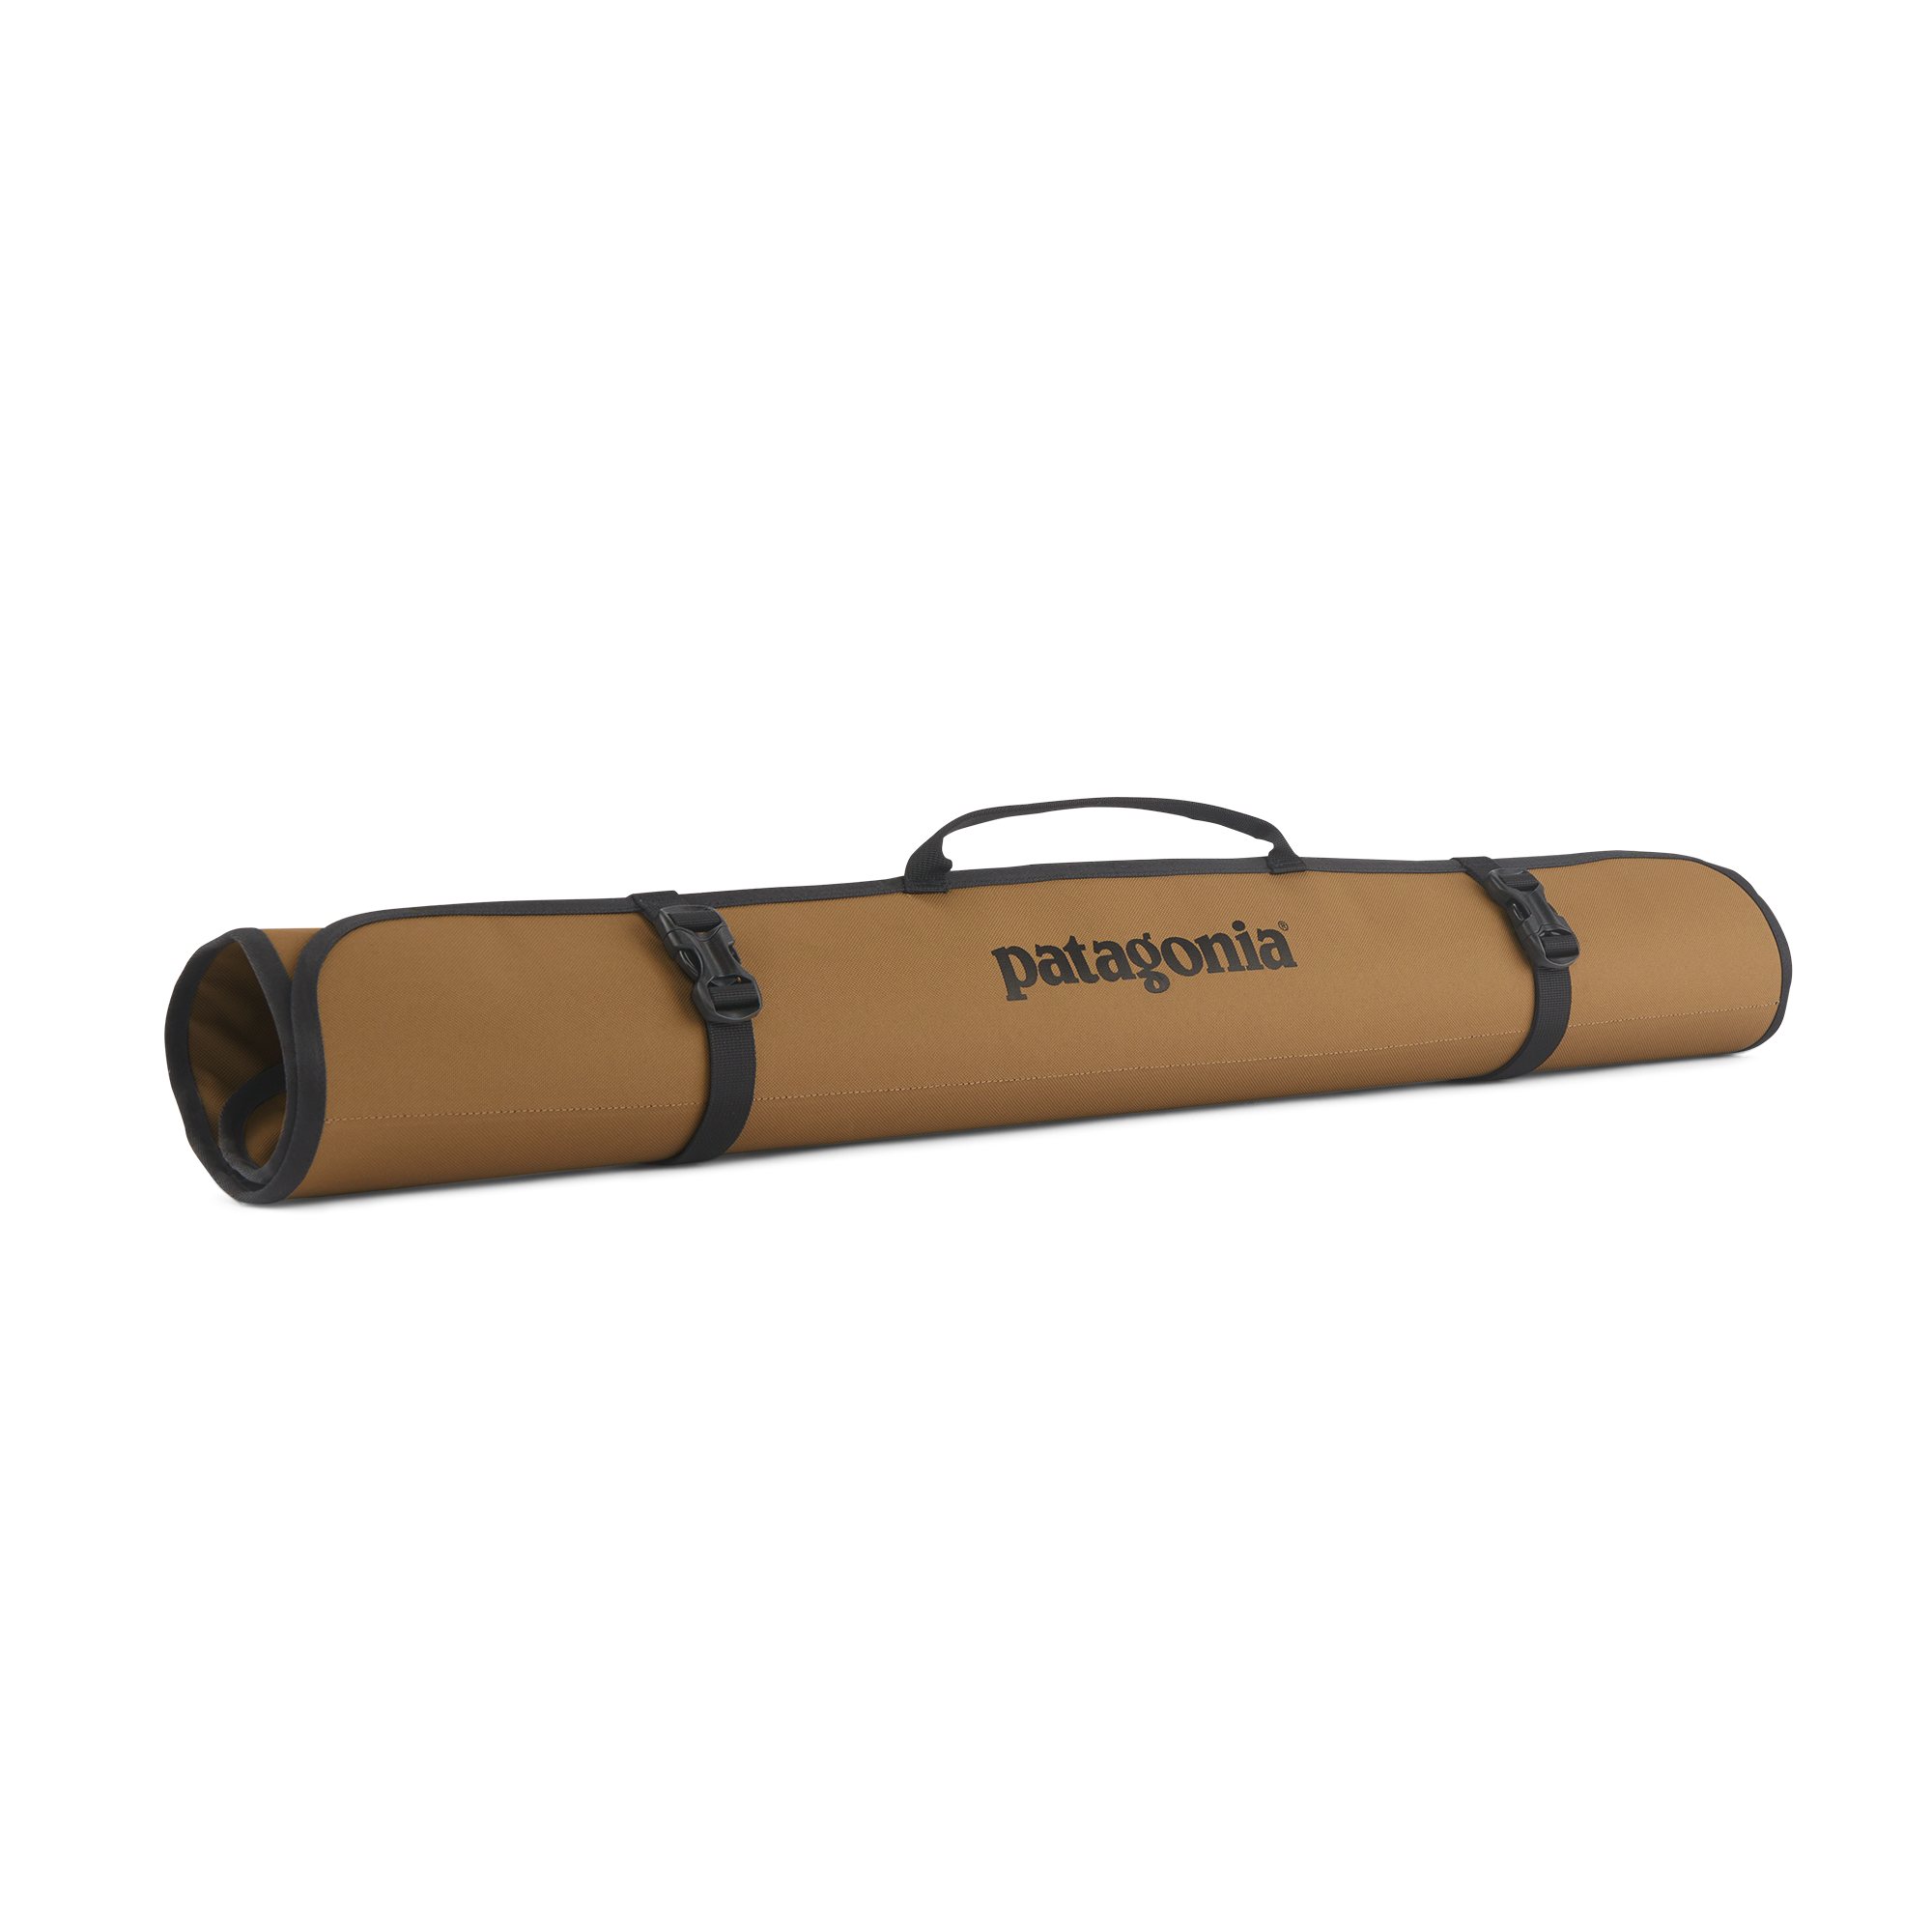 Patagonia Travel Fly Rod Roll Case in Coriander Brown w/Black